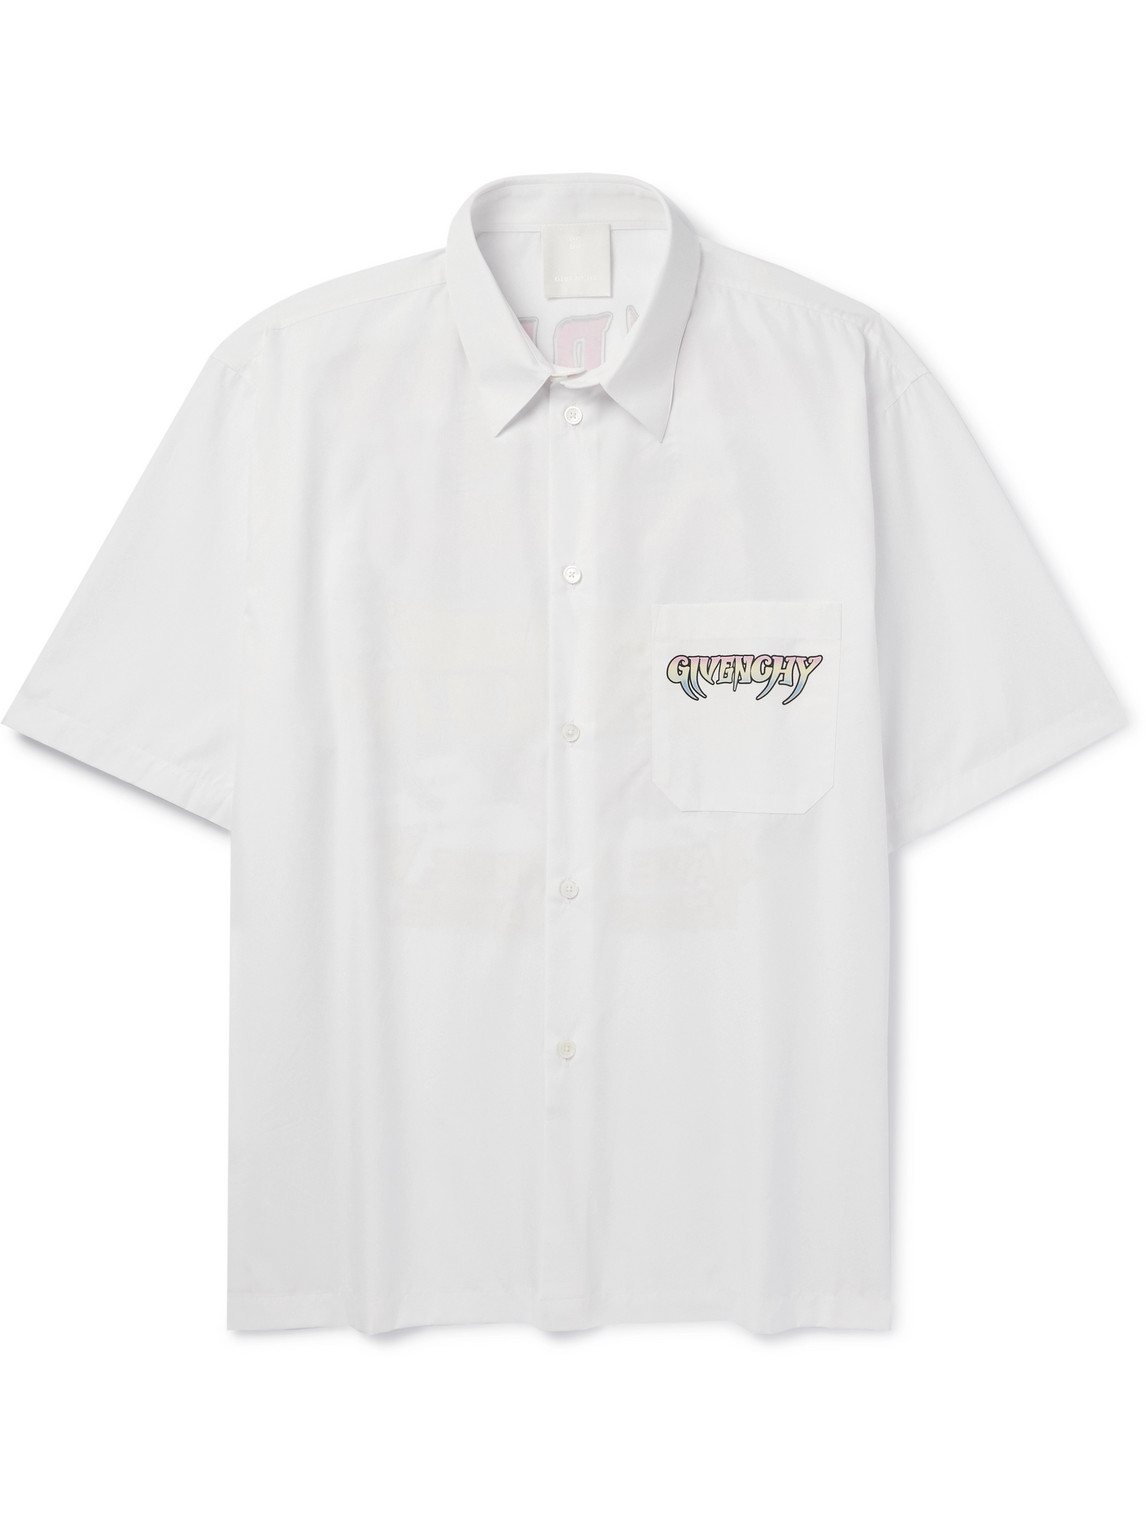 Givenchy Printed Cotton-poplin Shirt In White